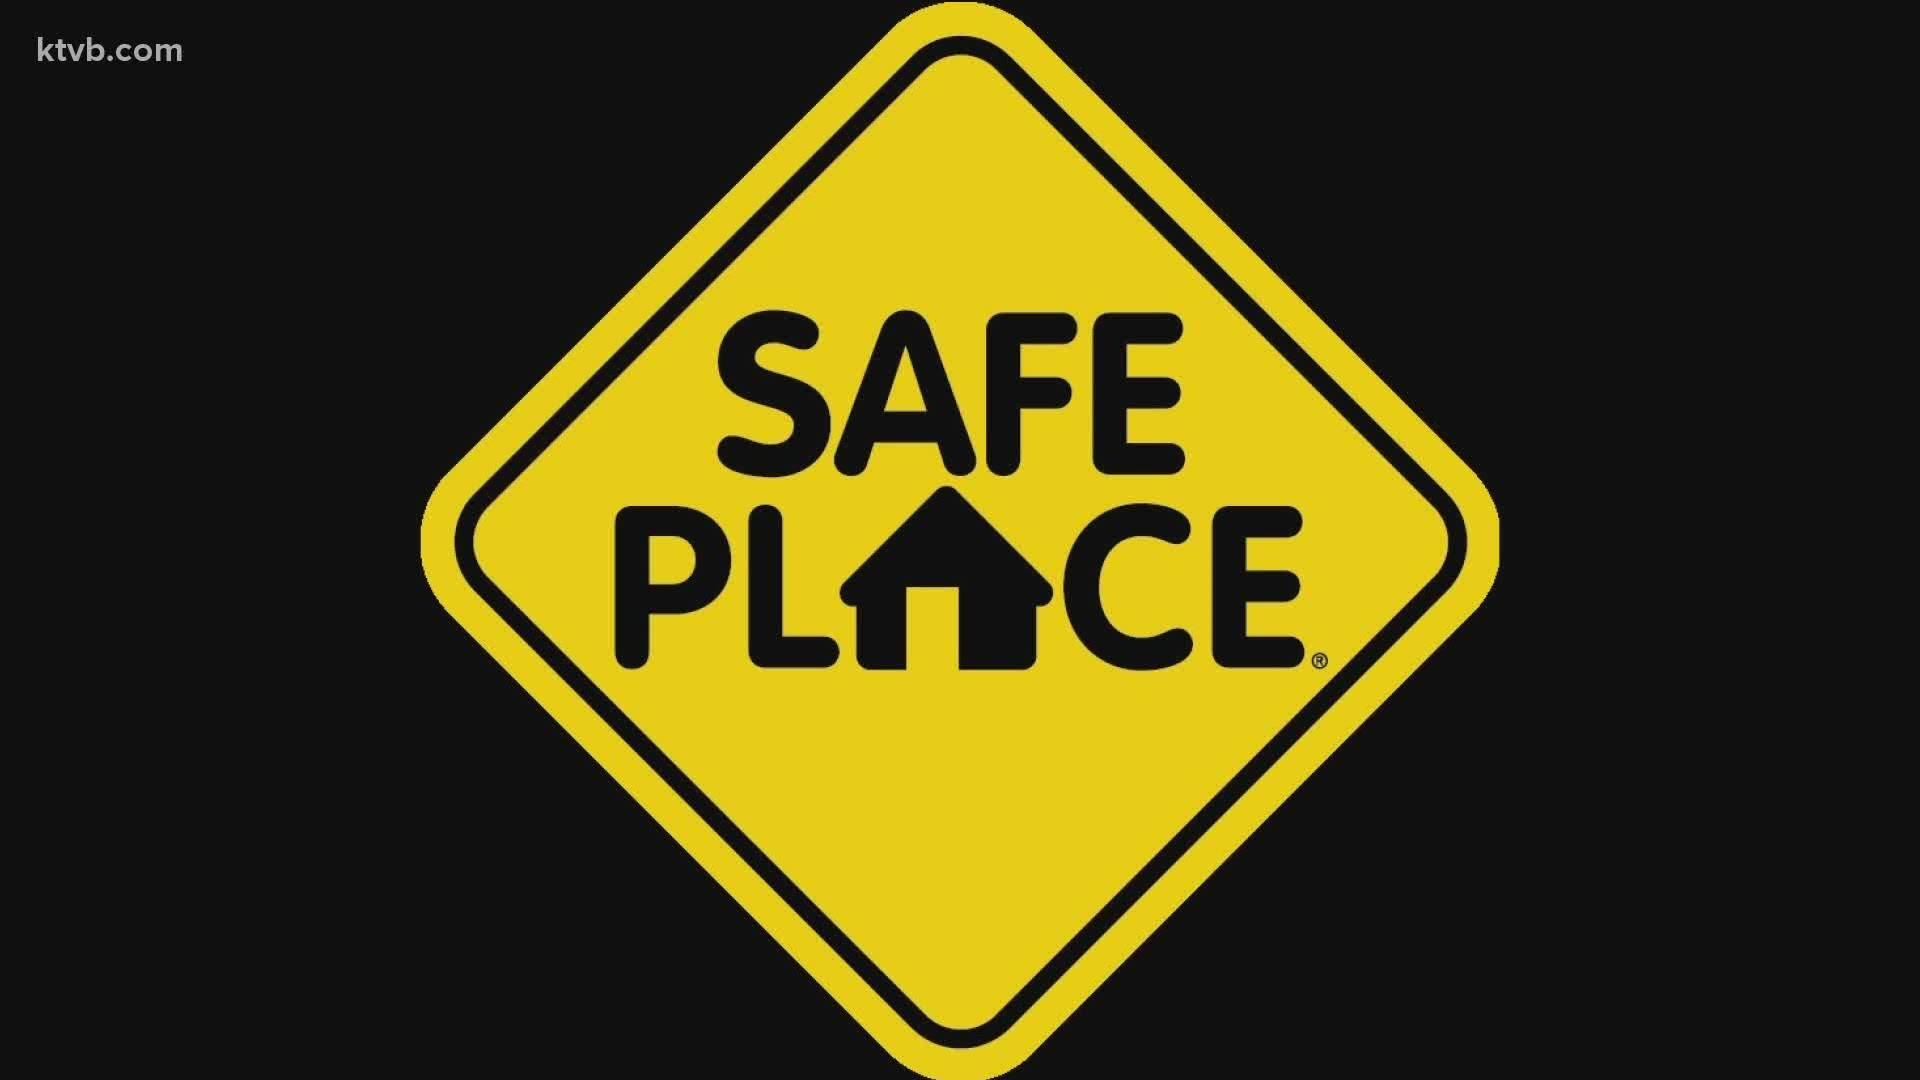 A safe place for youth is for those who need immediate help.